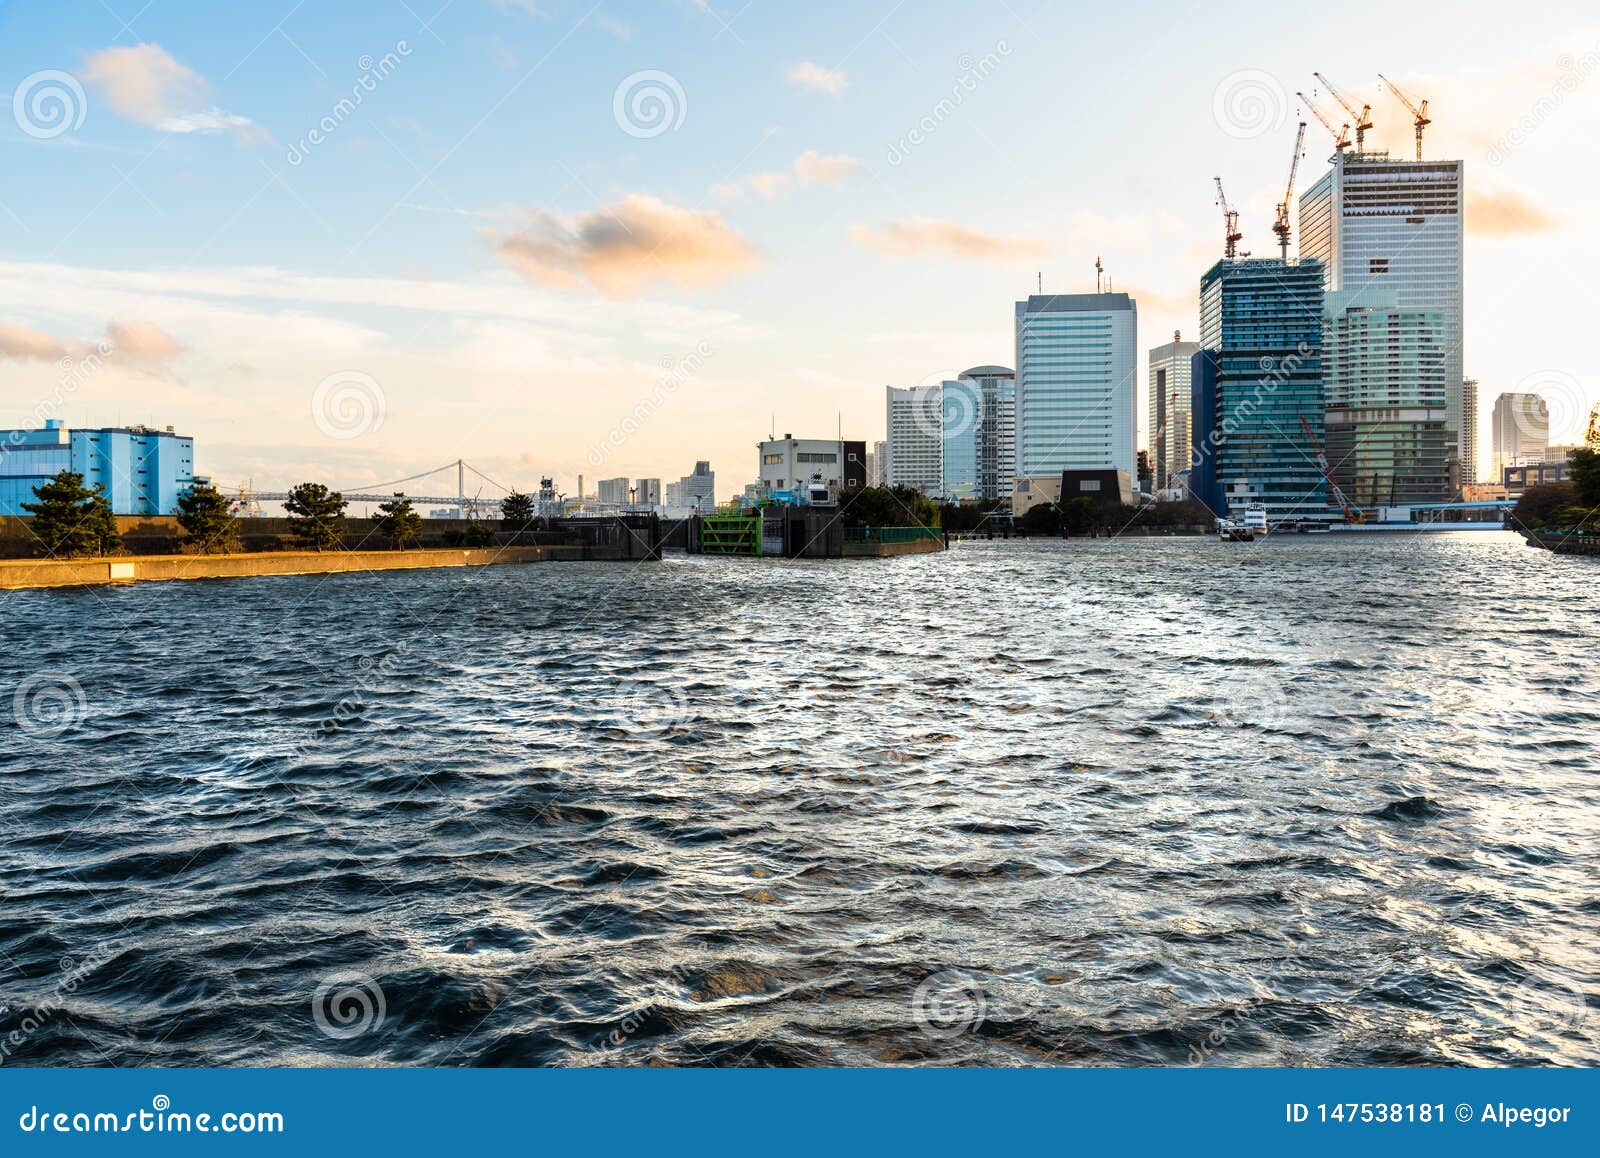 View Of Tokyo Bay Area Under Clear Sky At Sunset Stock Image Image Of Cityscape Skyline